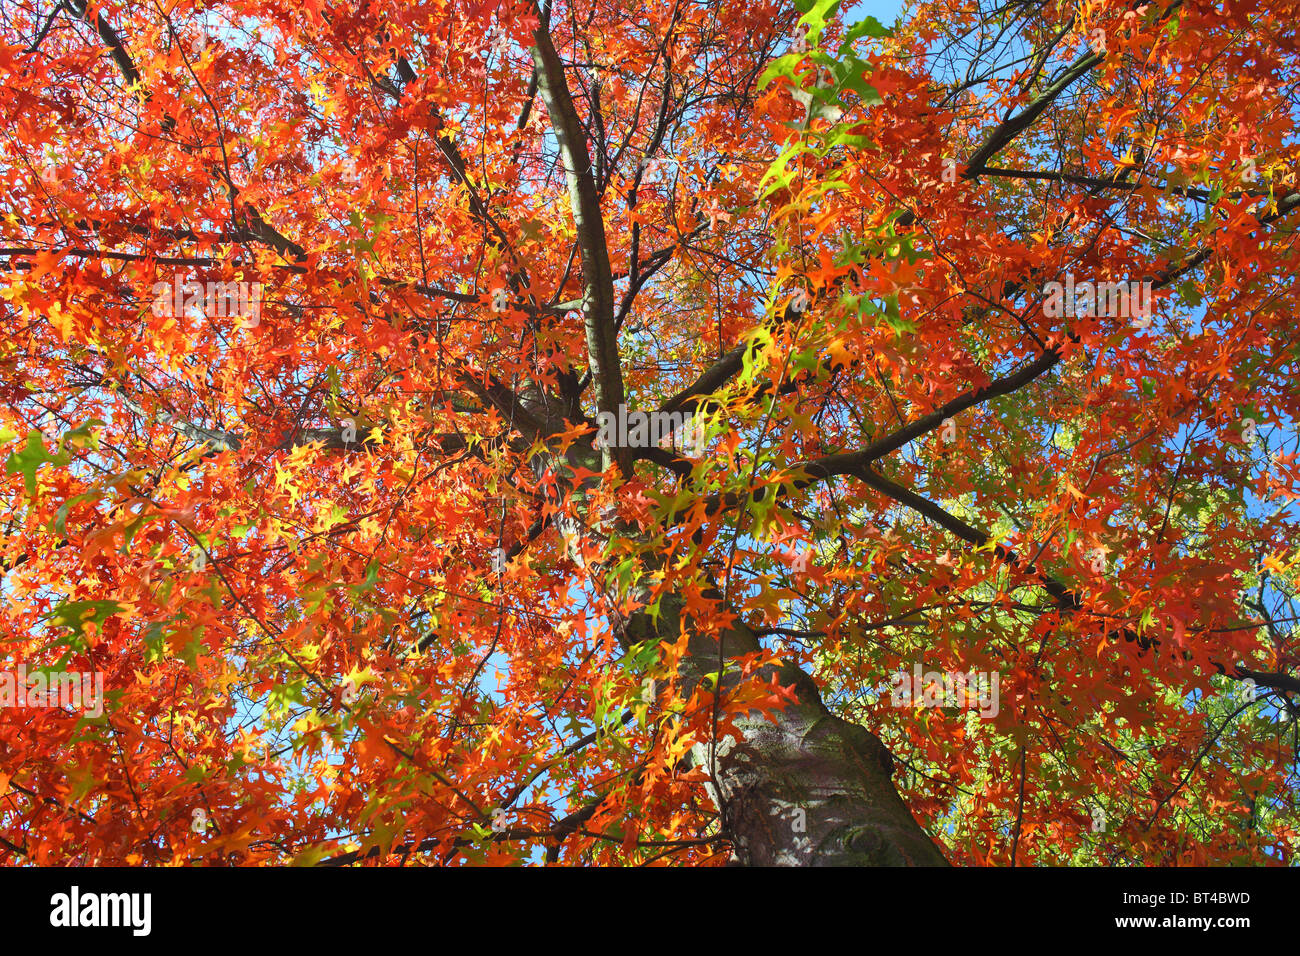 Pin oak scarlet and red leaves in autumn Quercus palustris Stock Photo